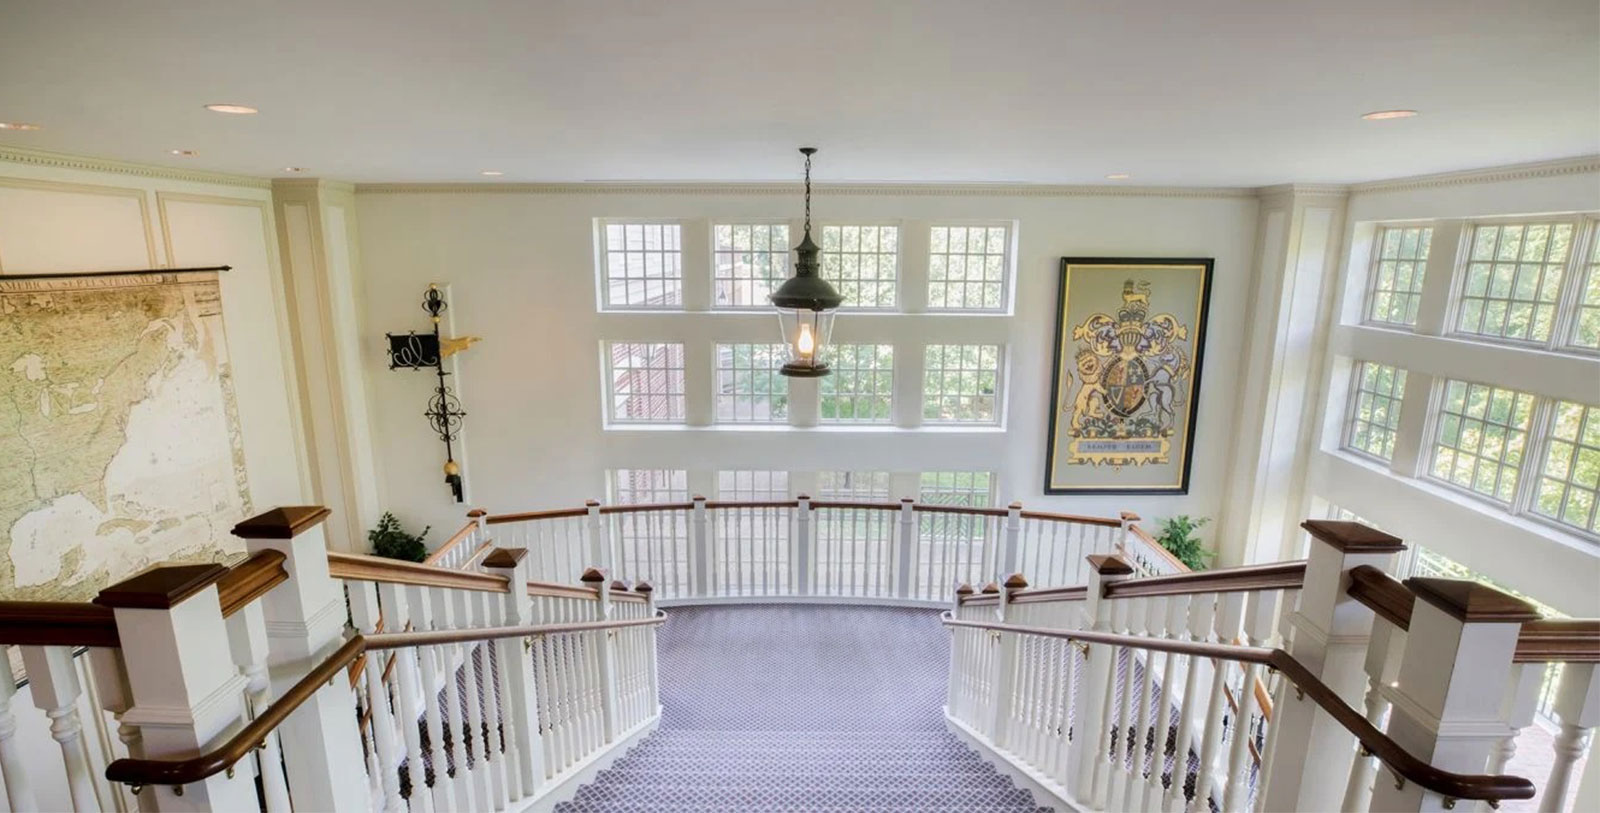 Image of Lodge Staircase, Williamsburg Lodge, Autograph Collection, and Colonial Houses, 1750, Member of Historic Hotels of America, in Williamsburg Virginia, Request for Proposal